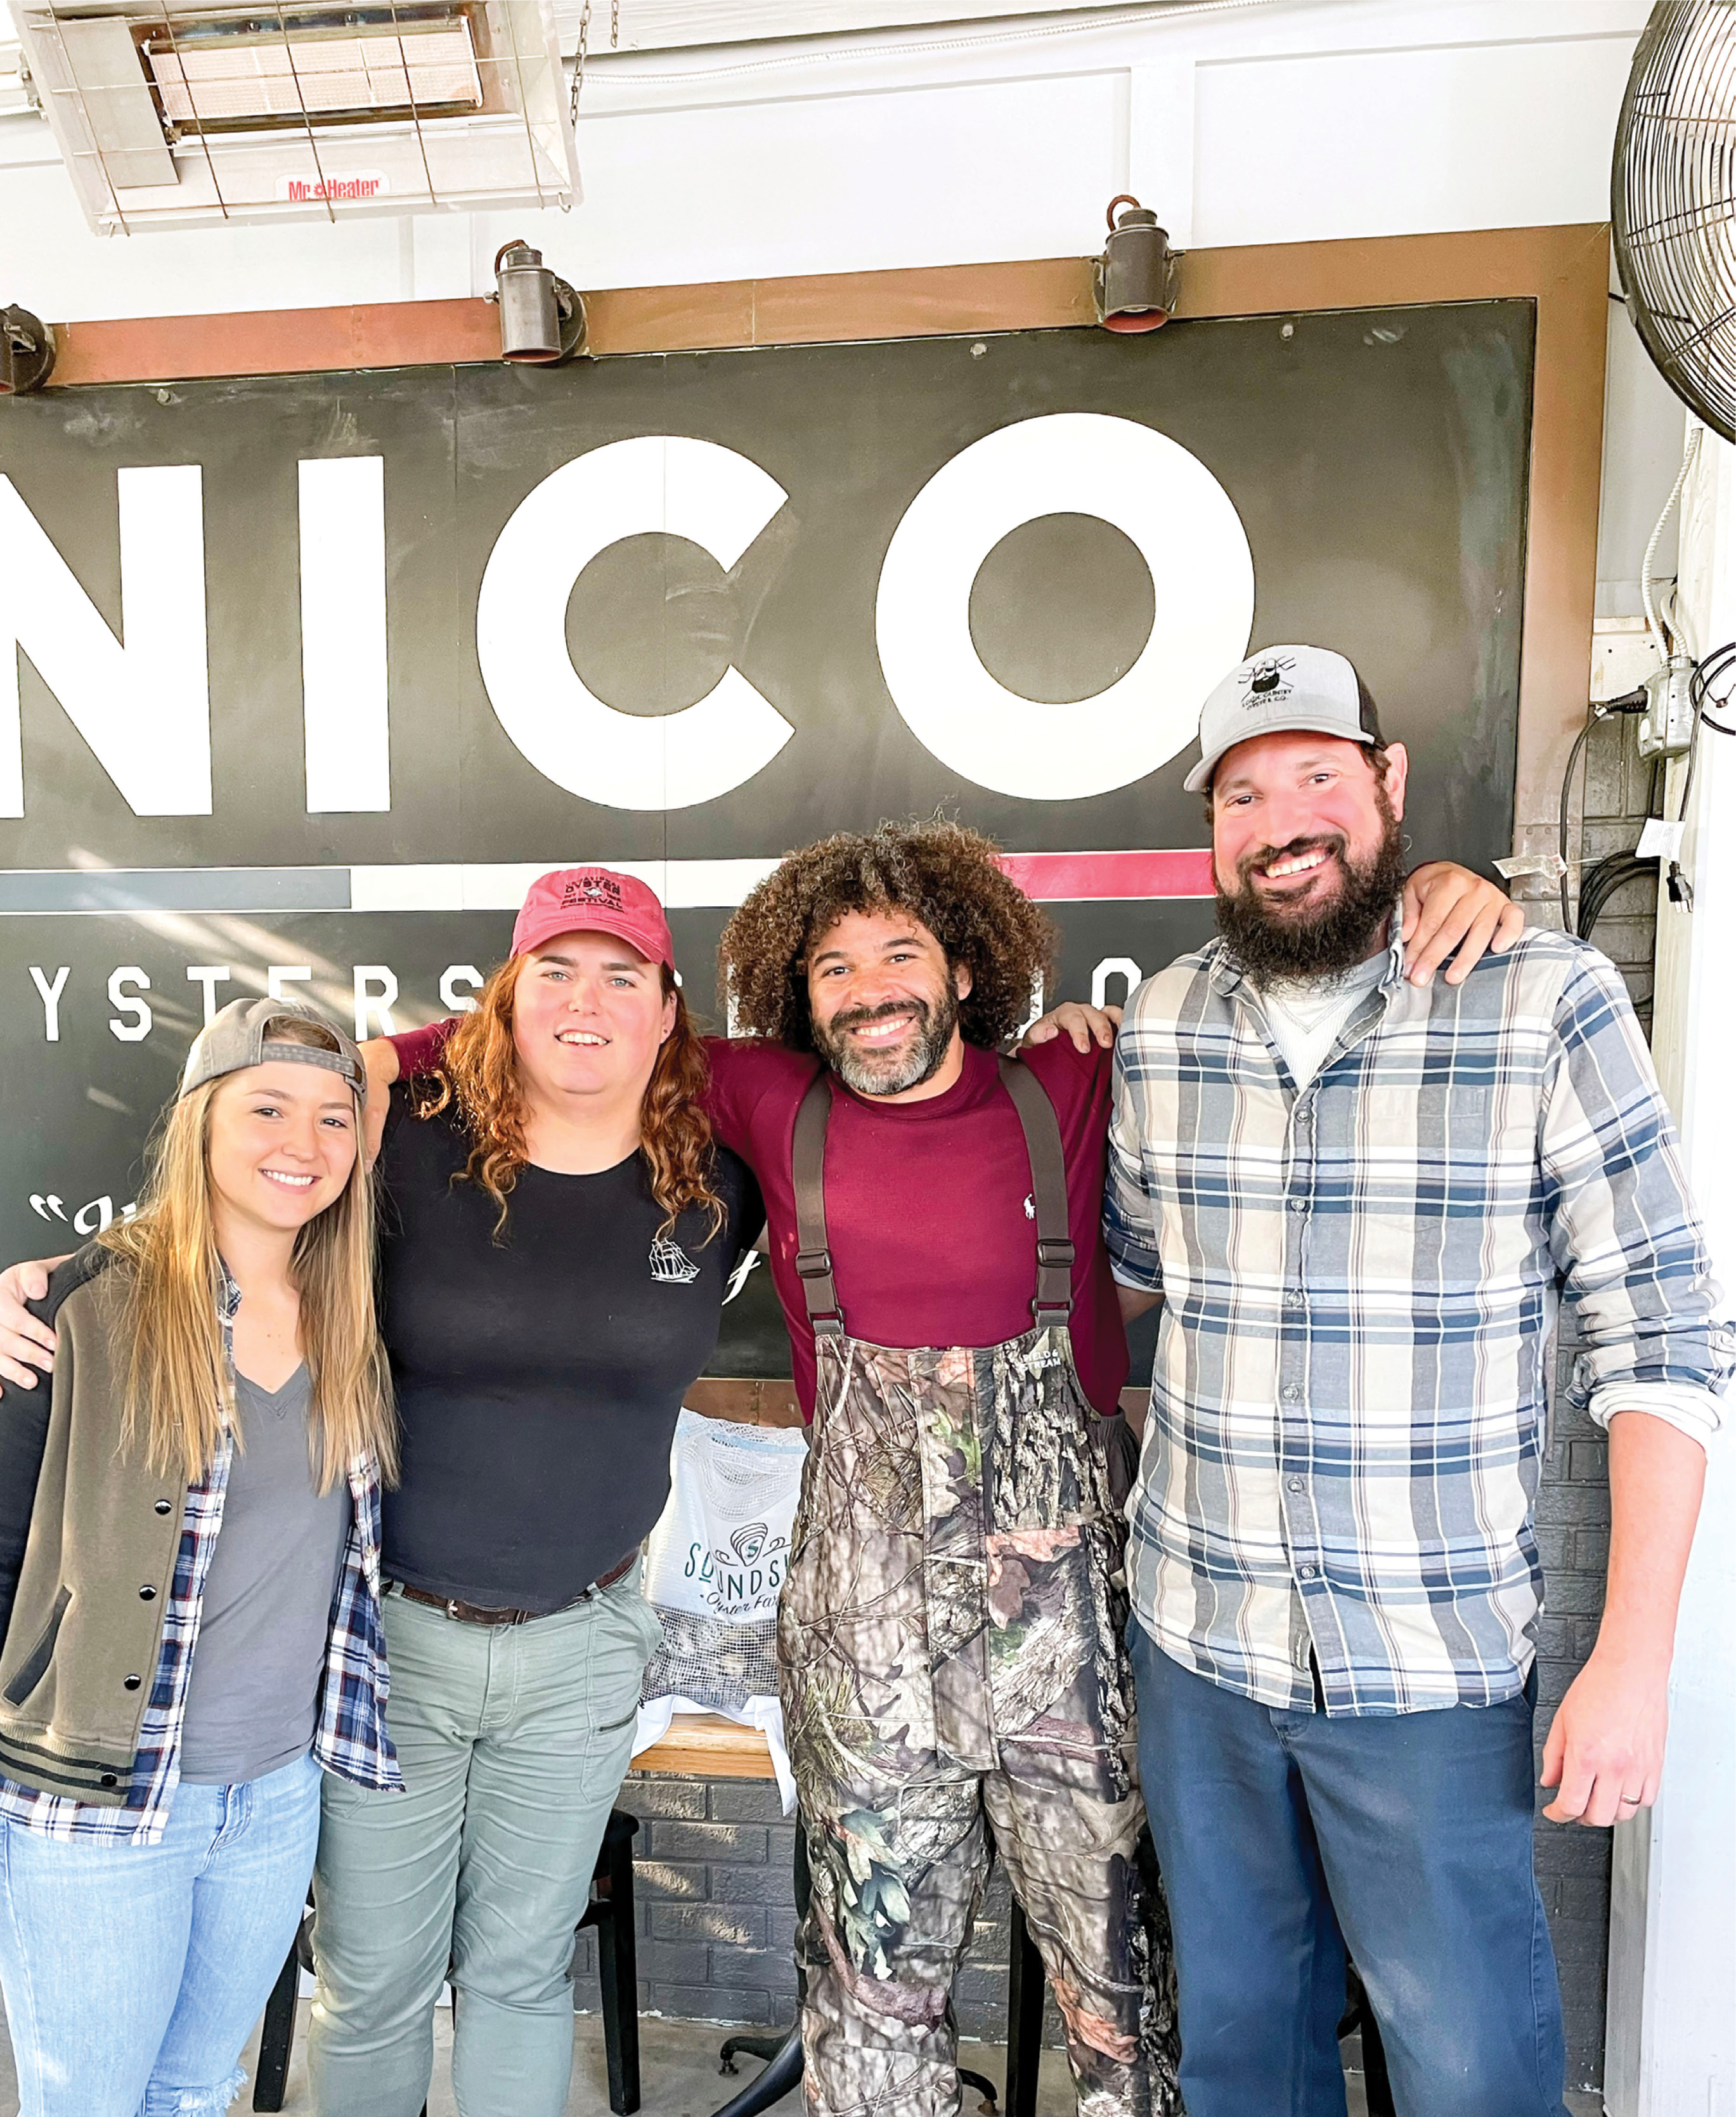 Isabella Macbeth (second from left) is just as comfortable behind the raw bar of seafood stalwart Nico as she is onstage competing against pro shuckers from across the US. Hear from Macbeth—pictured here with competitive shucker Brooklyn Paul, North Carolina oyster farmer Ryan Bethea, and Pearlz bar manager Nate Alton—in this issue’s 15 Minutes With.